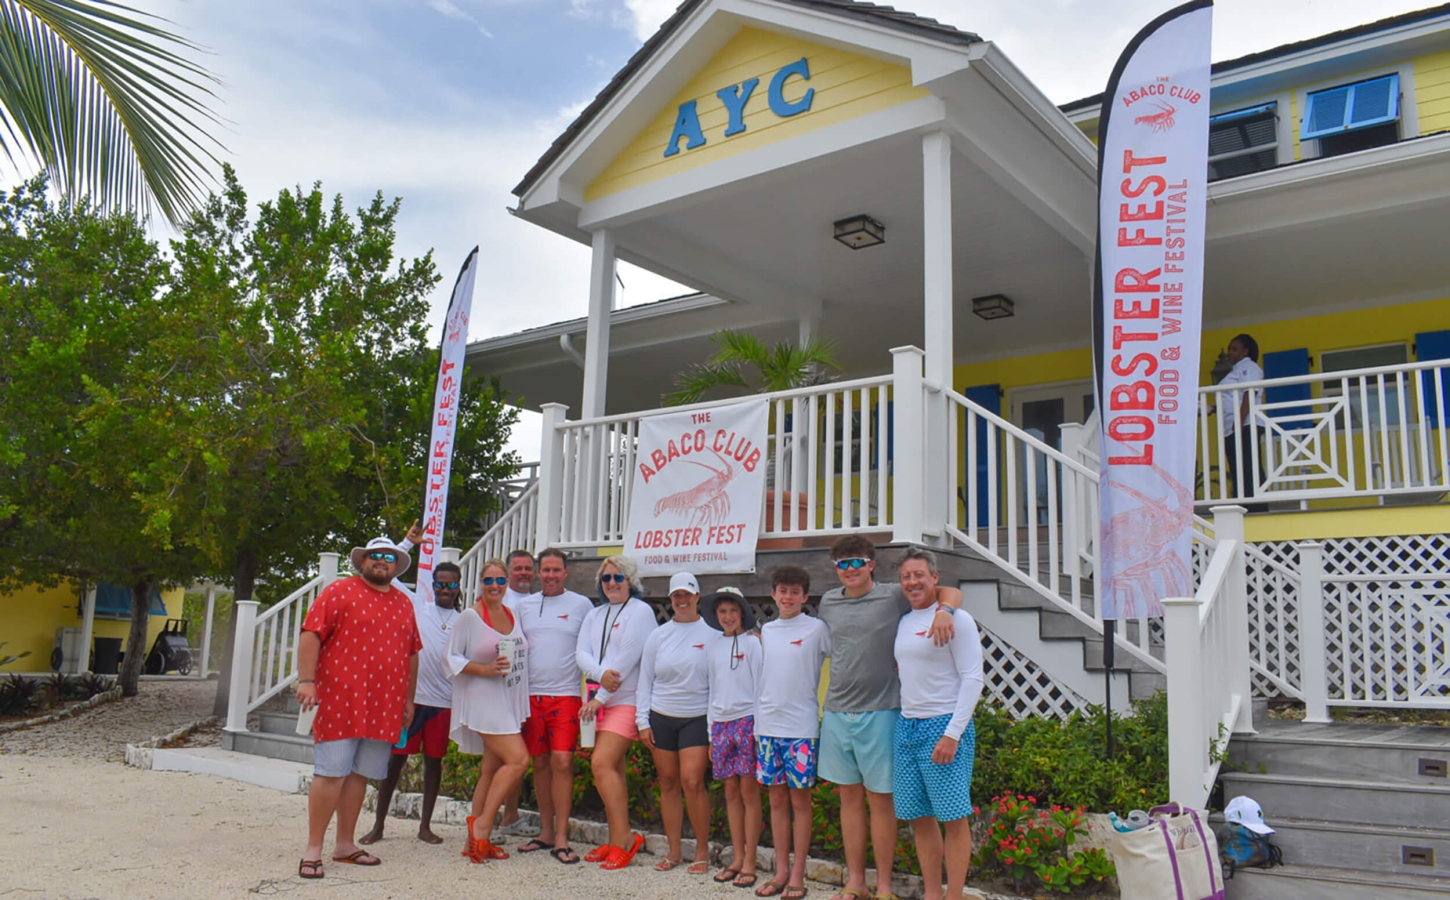 The Abaco Club members and staff posing at a lobster fest